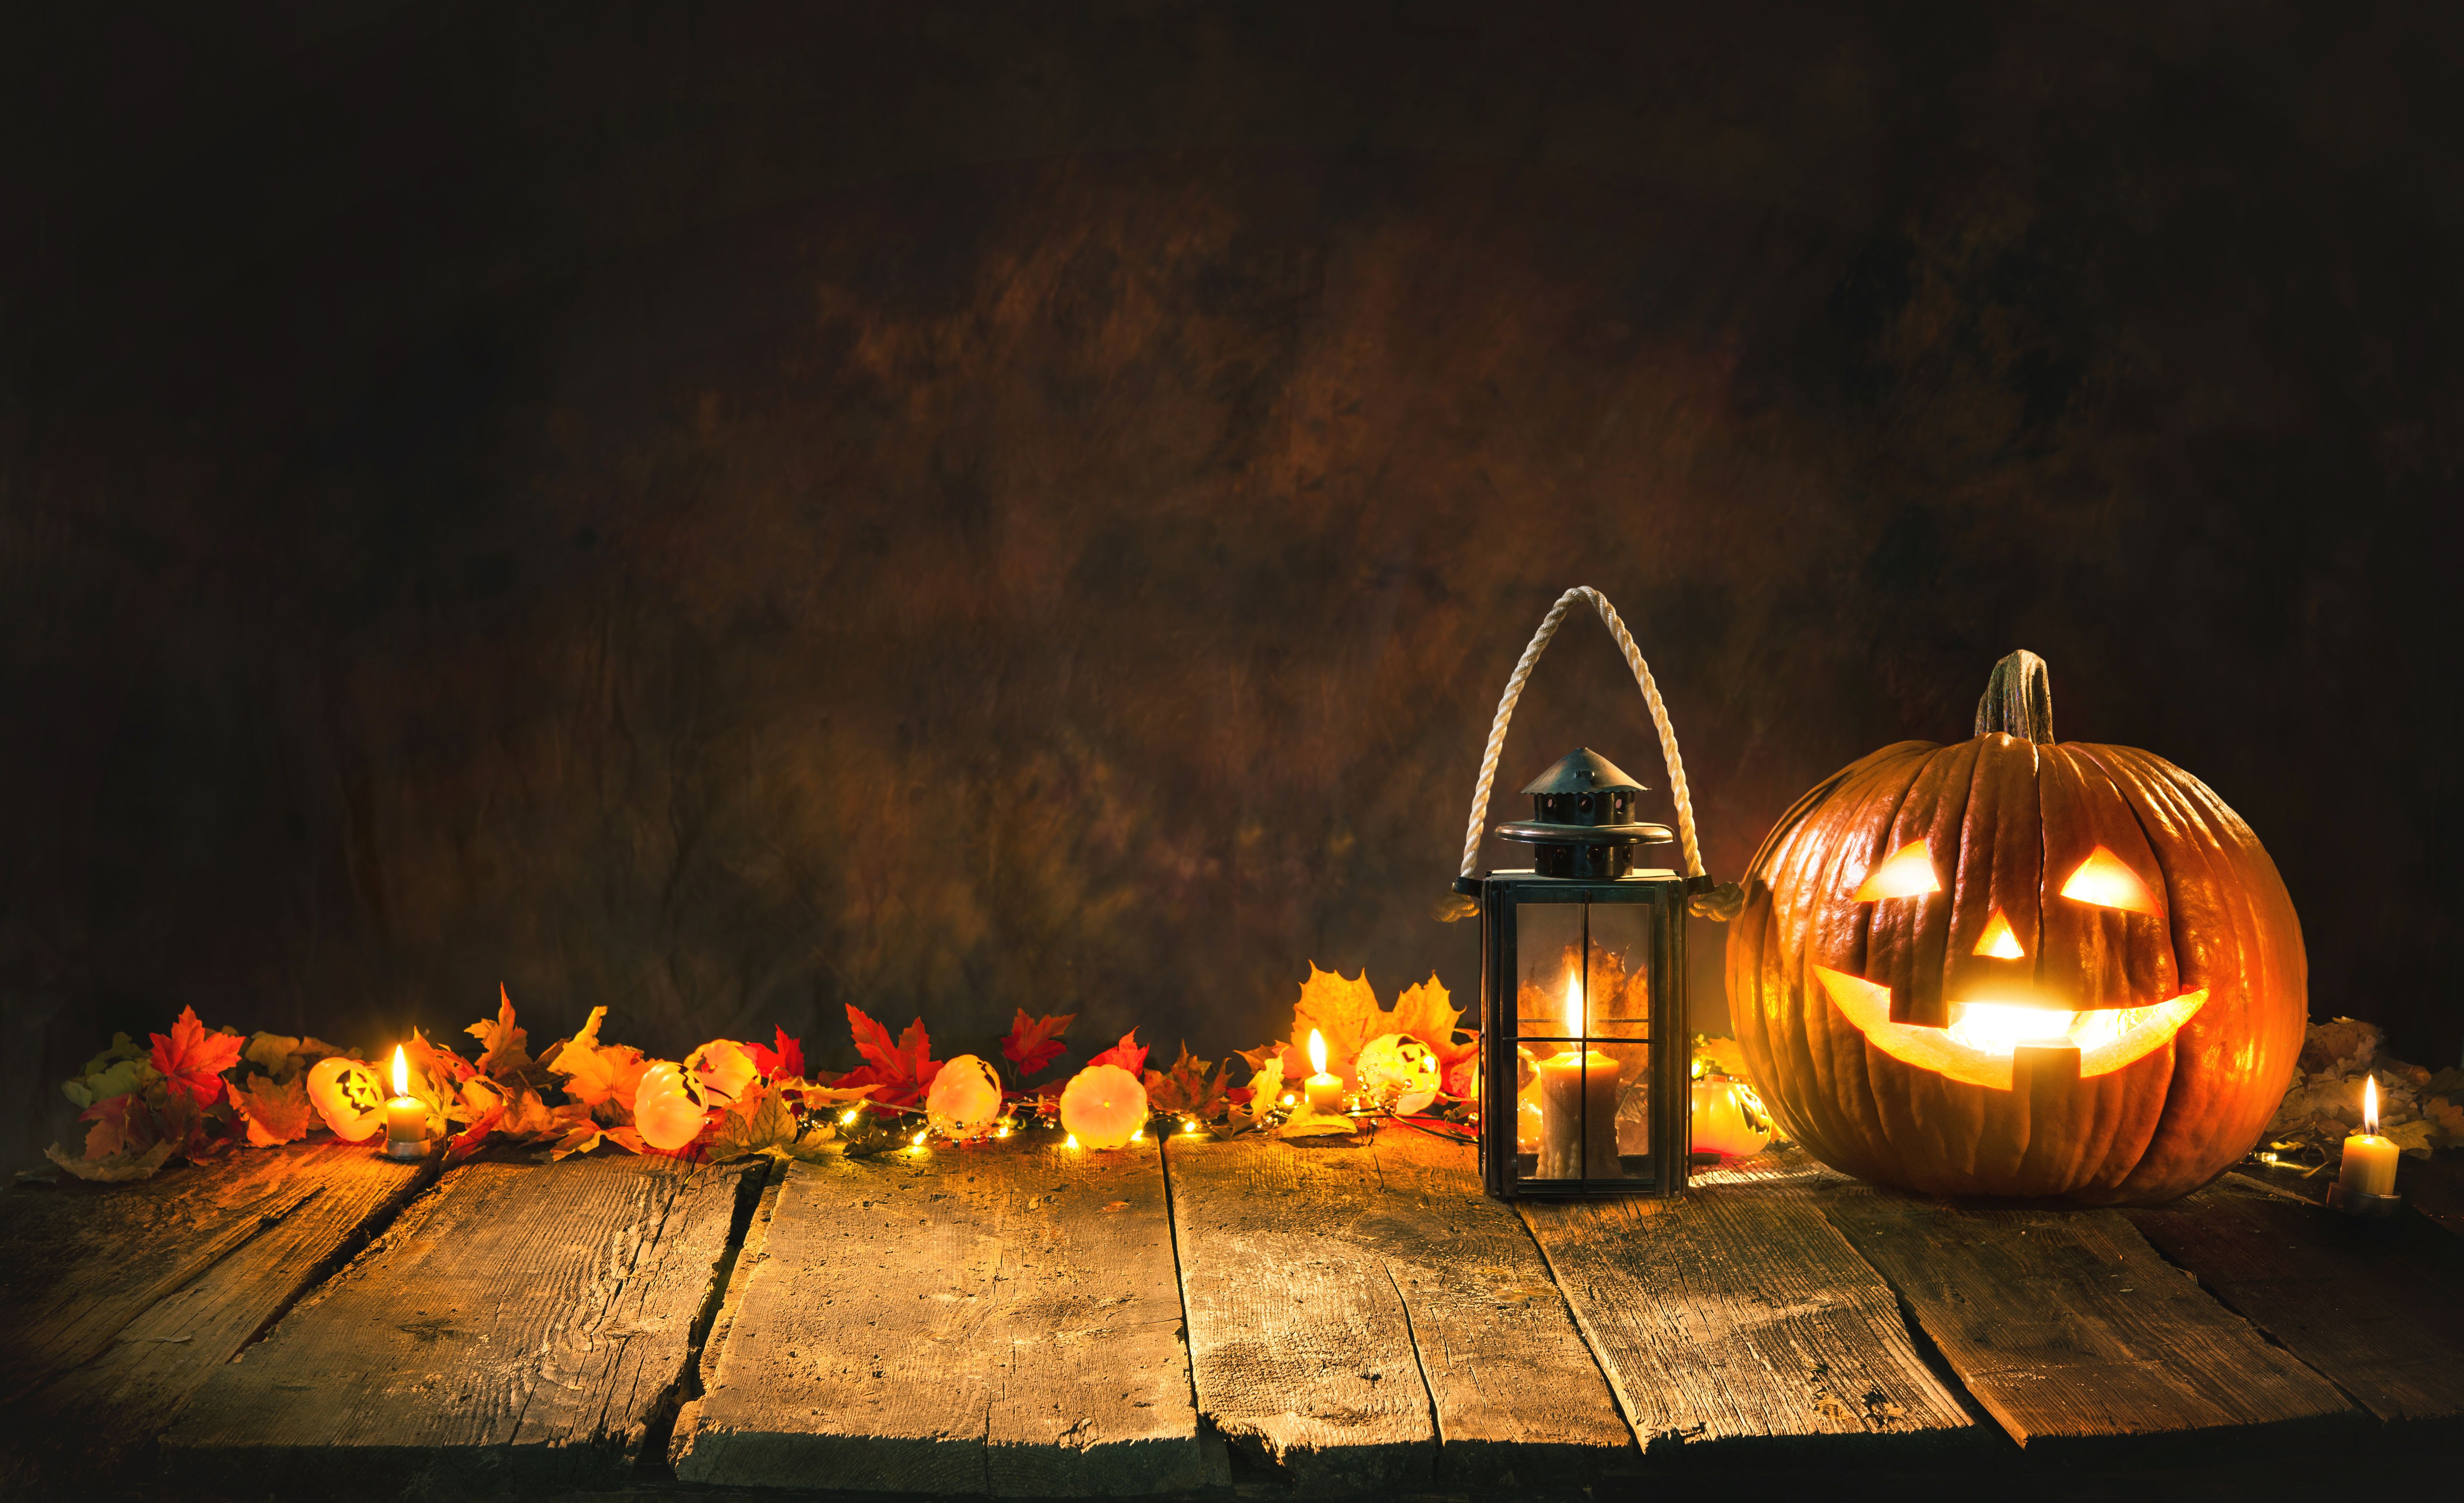 Halloween 1440P Resolution Wallpaper, HD Holidays 4K Wallpaper, Image, Photo and Background